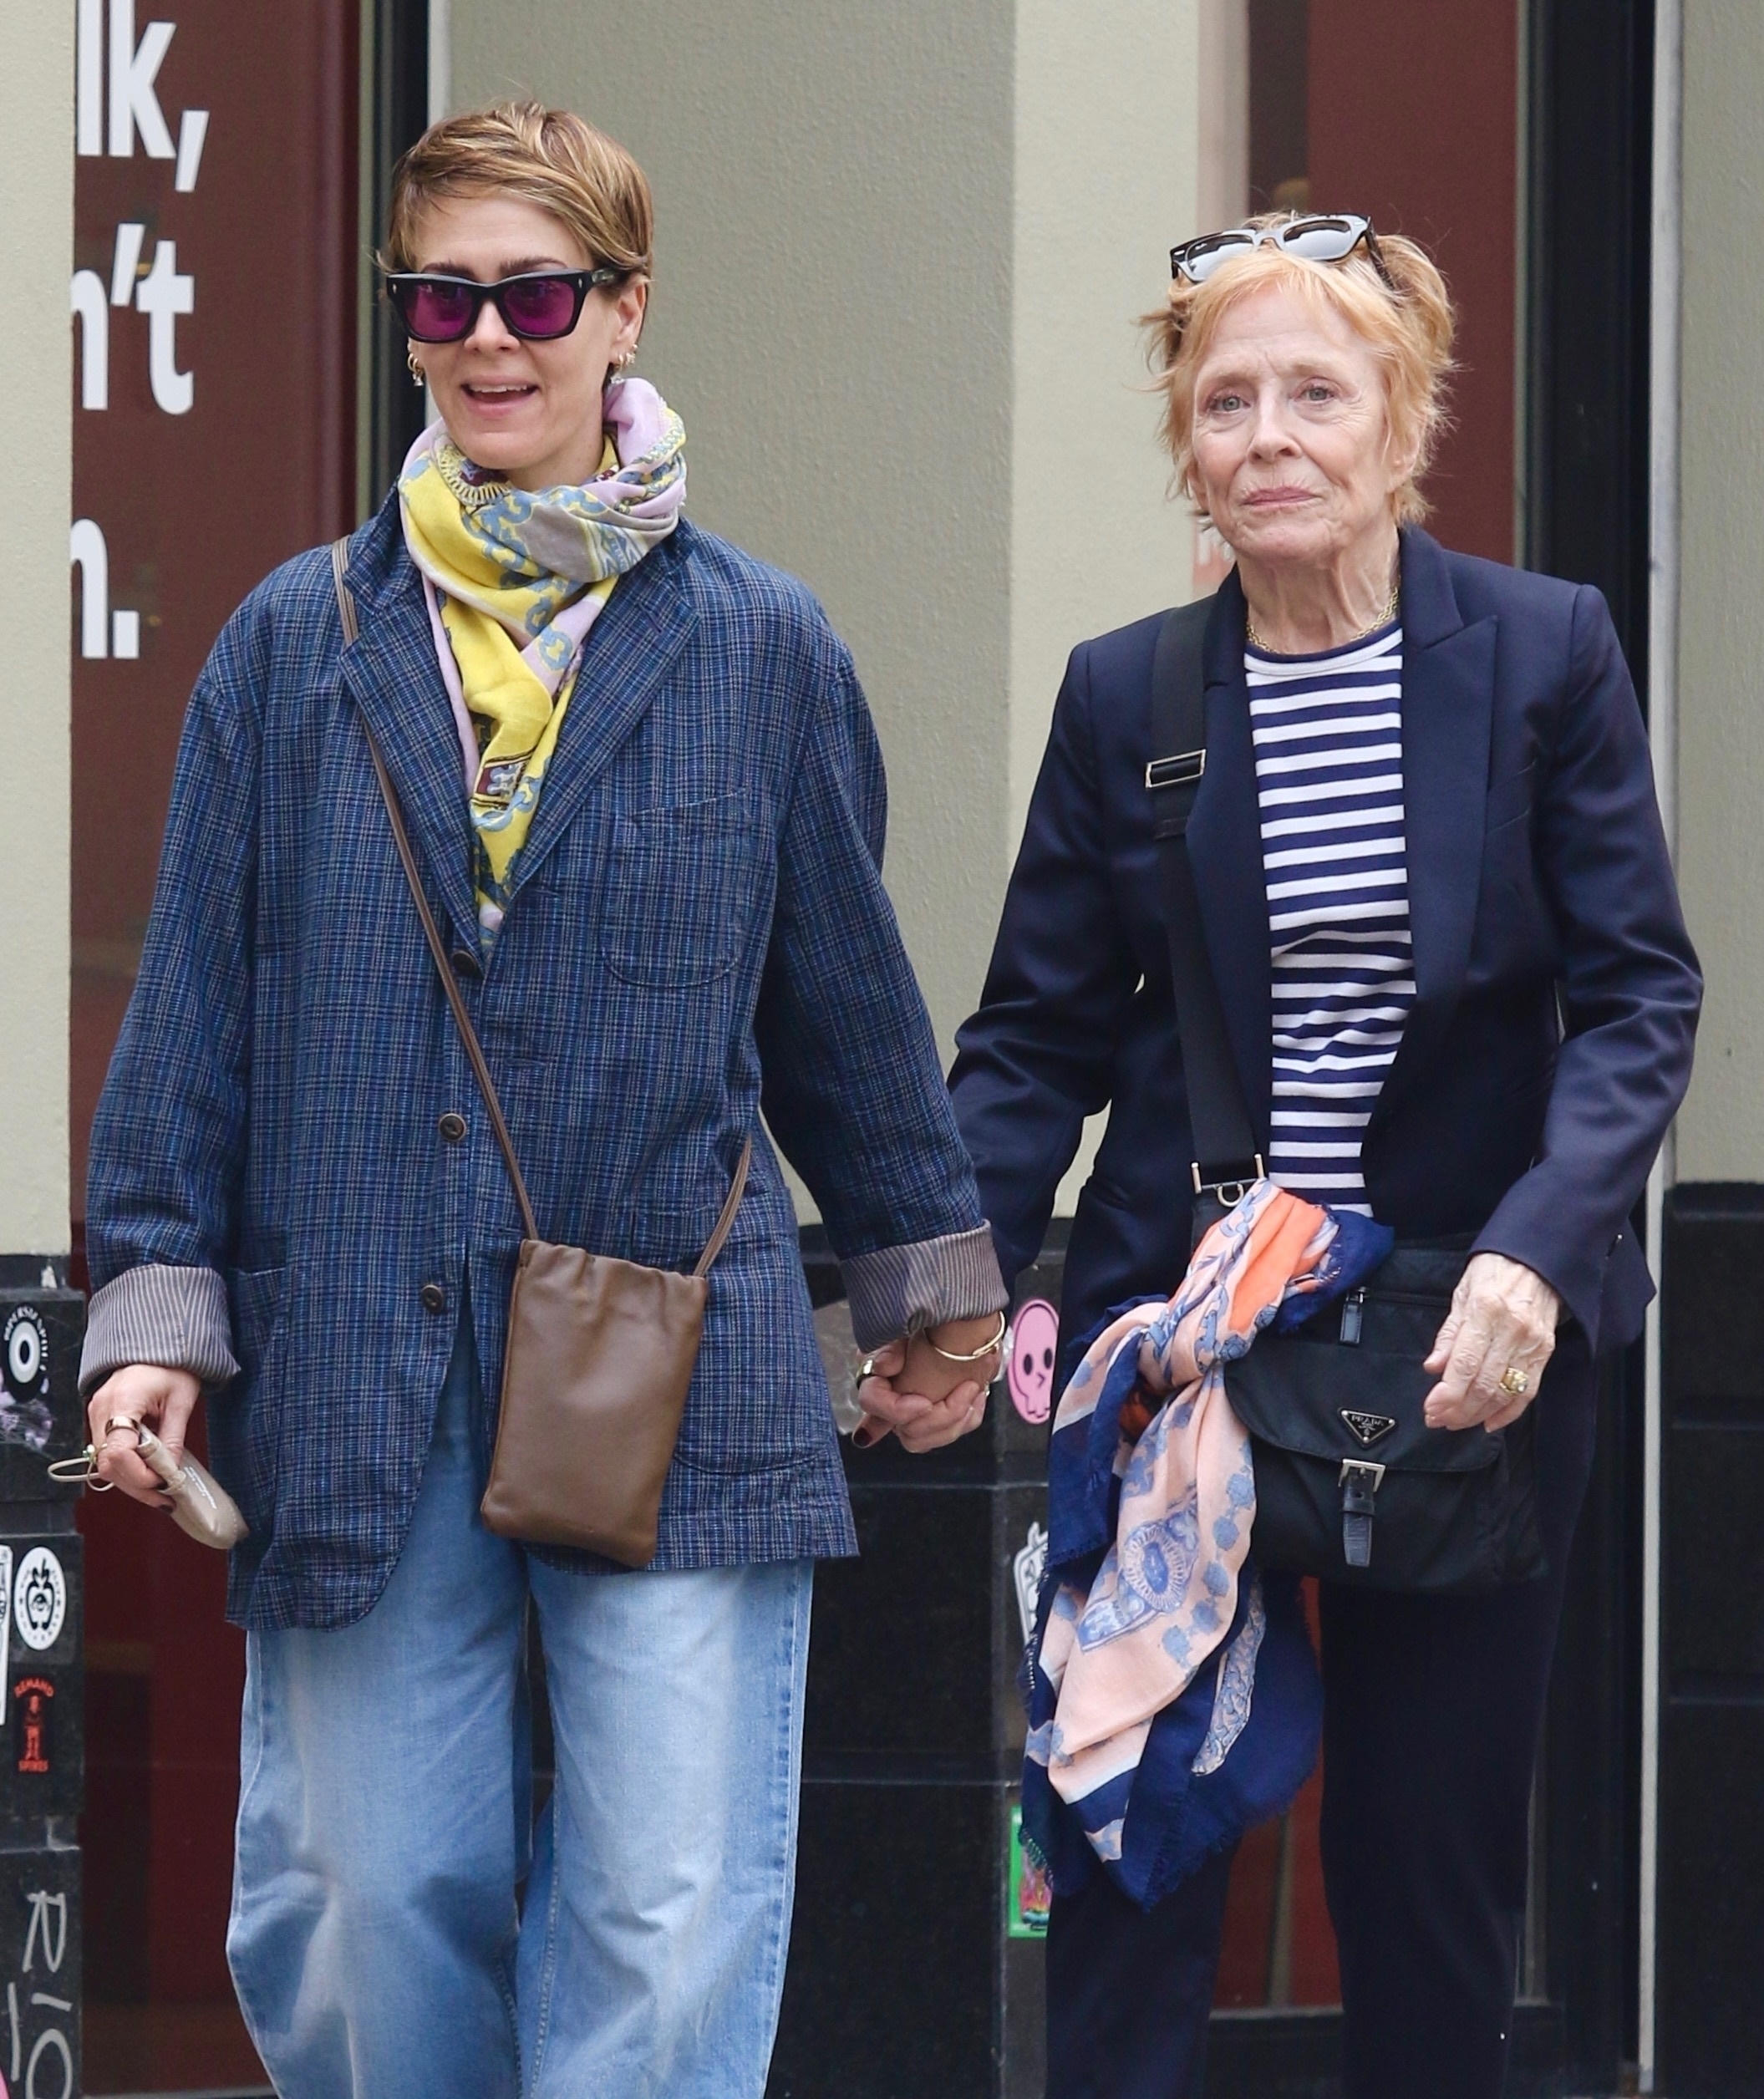 <p><span>There's a 32-year age gap between Sarah Paulson and longtime girlfriend Holland Taylor (who are seen here in May 2023). "There's a poignancy to being with someone older," the "American Horror Story" star told The New York Times in 2016. "I think there's a greater appreciation of time and what you have together and what's important." The Emmy winners' romance first made headlines in 2015 when Sarah was 30 and Holland was 62.</span></p>